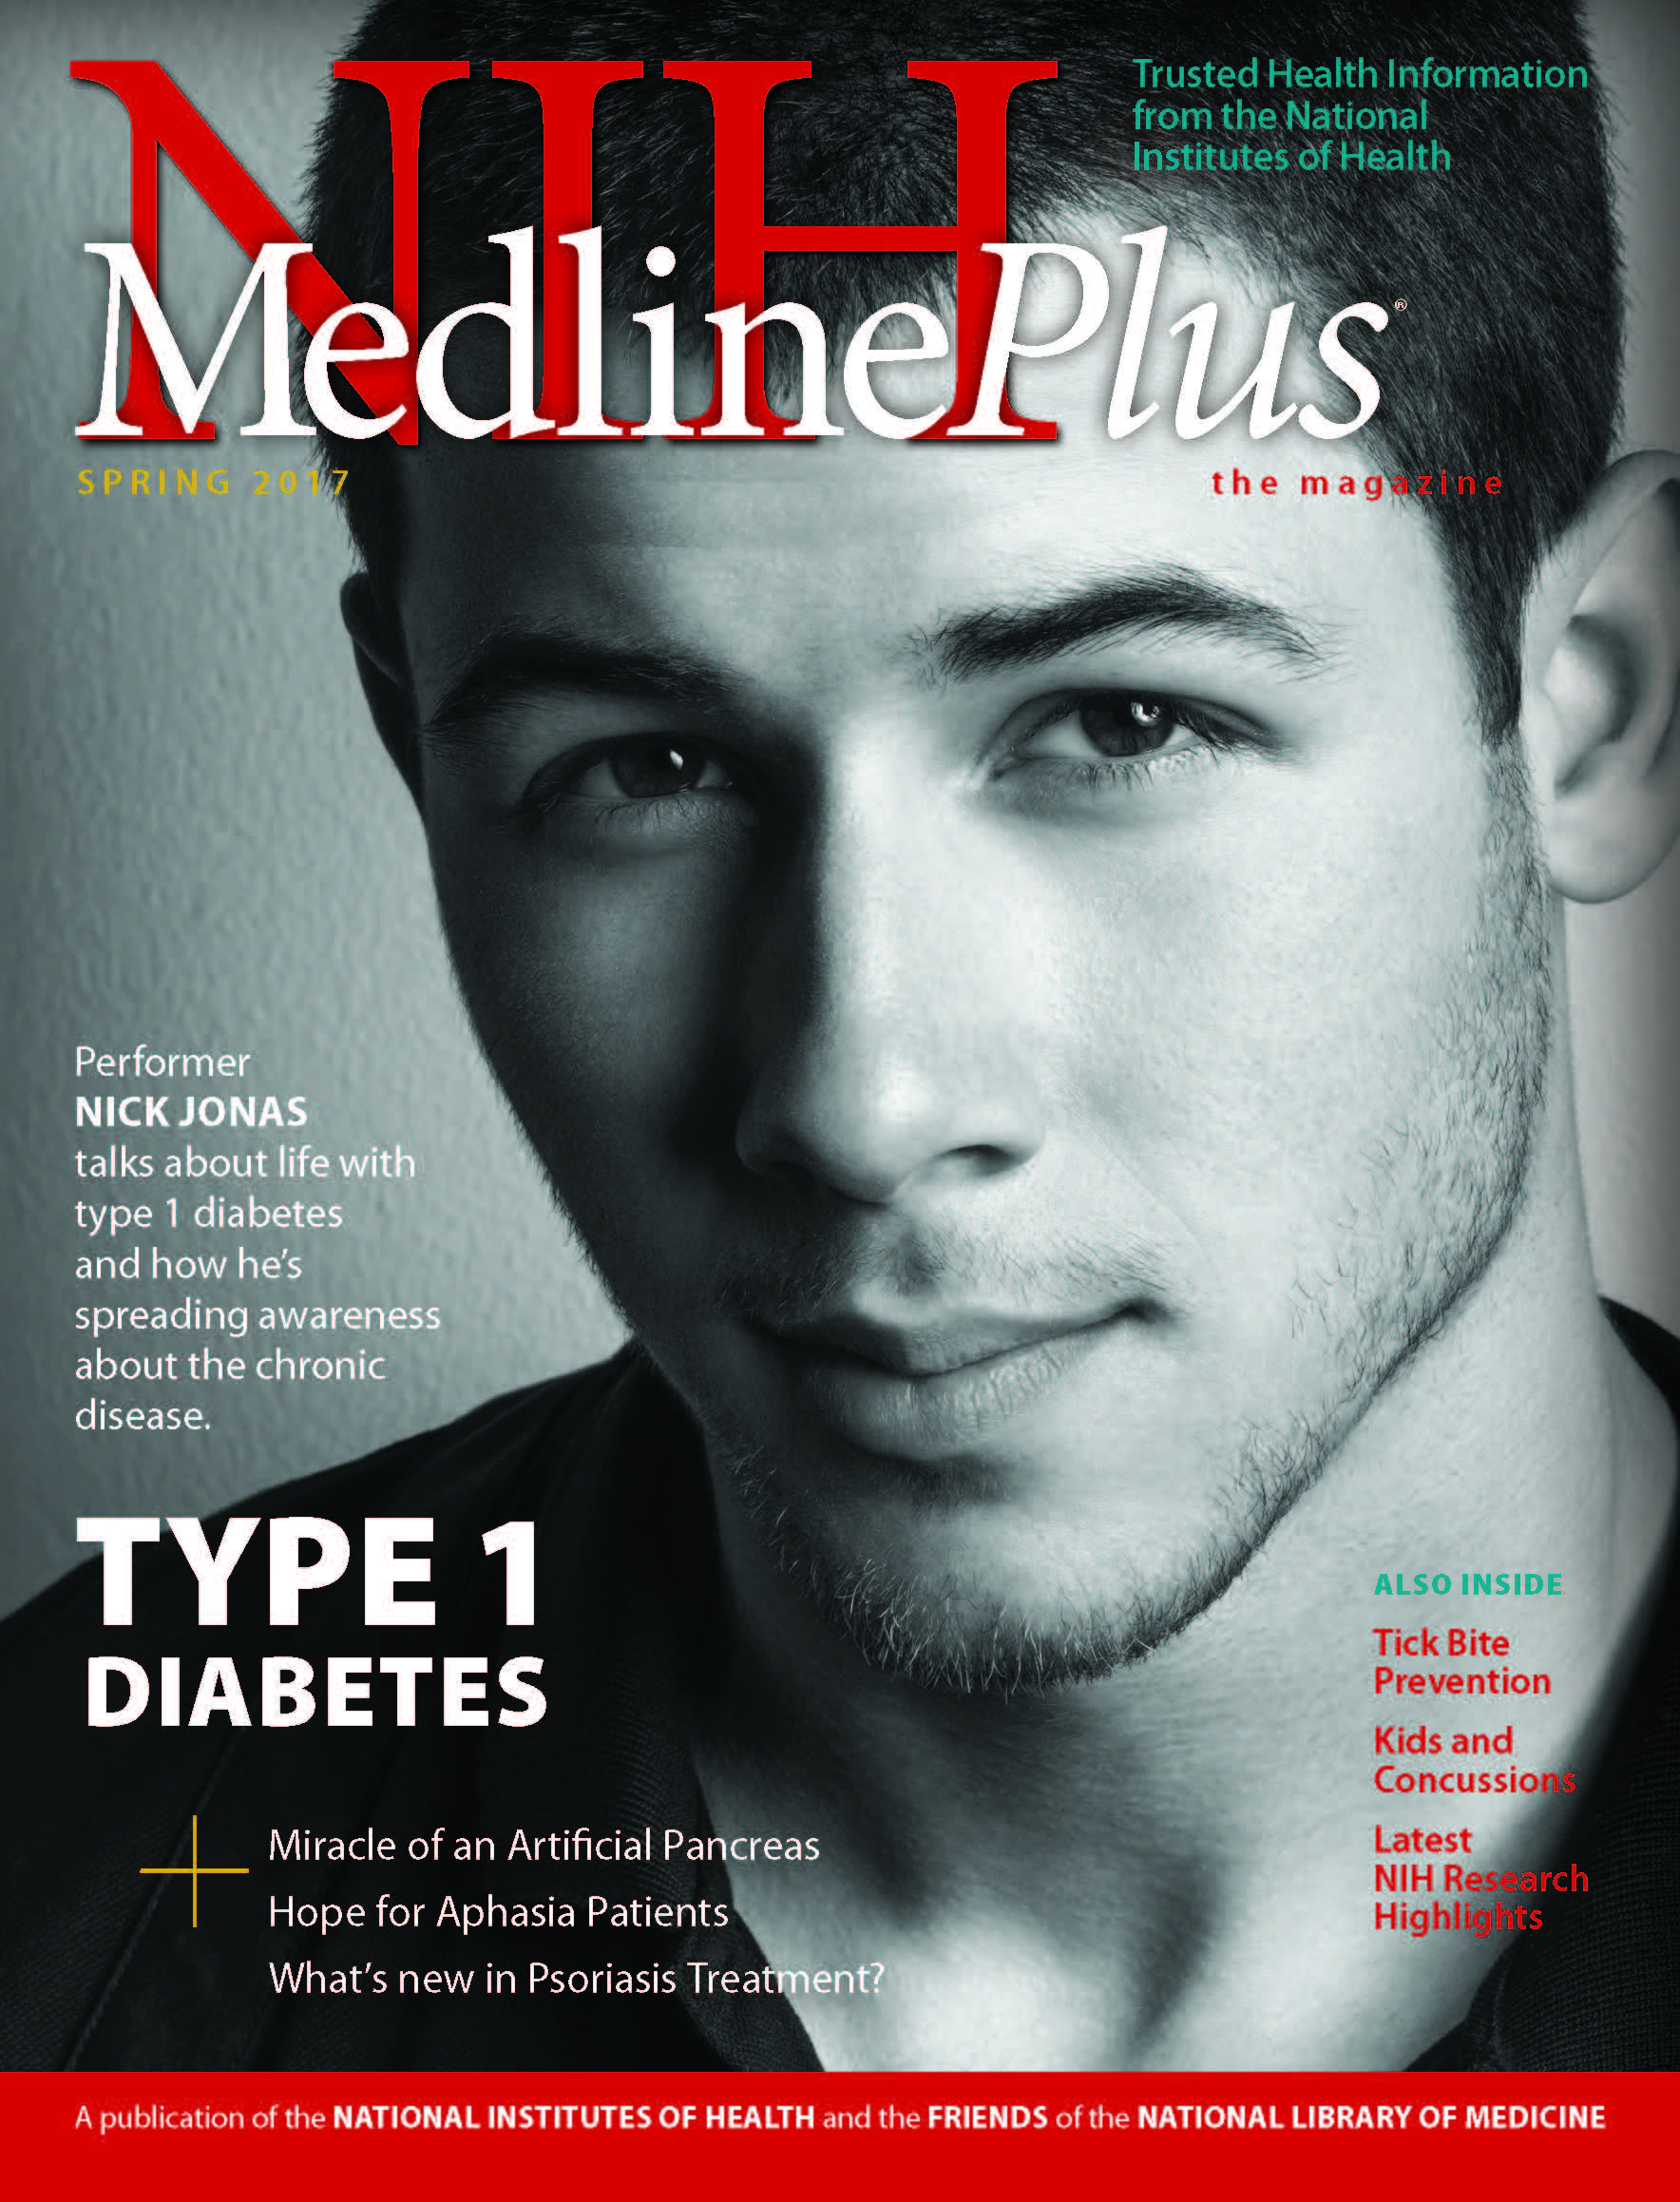 StratComm Awarded Contract by NLM to Produce MedlinePlus Magazine